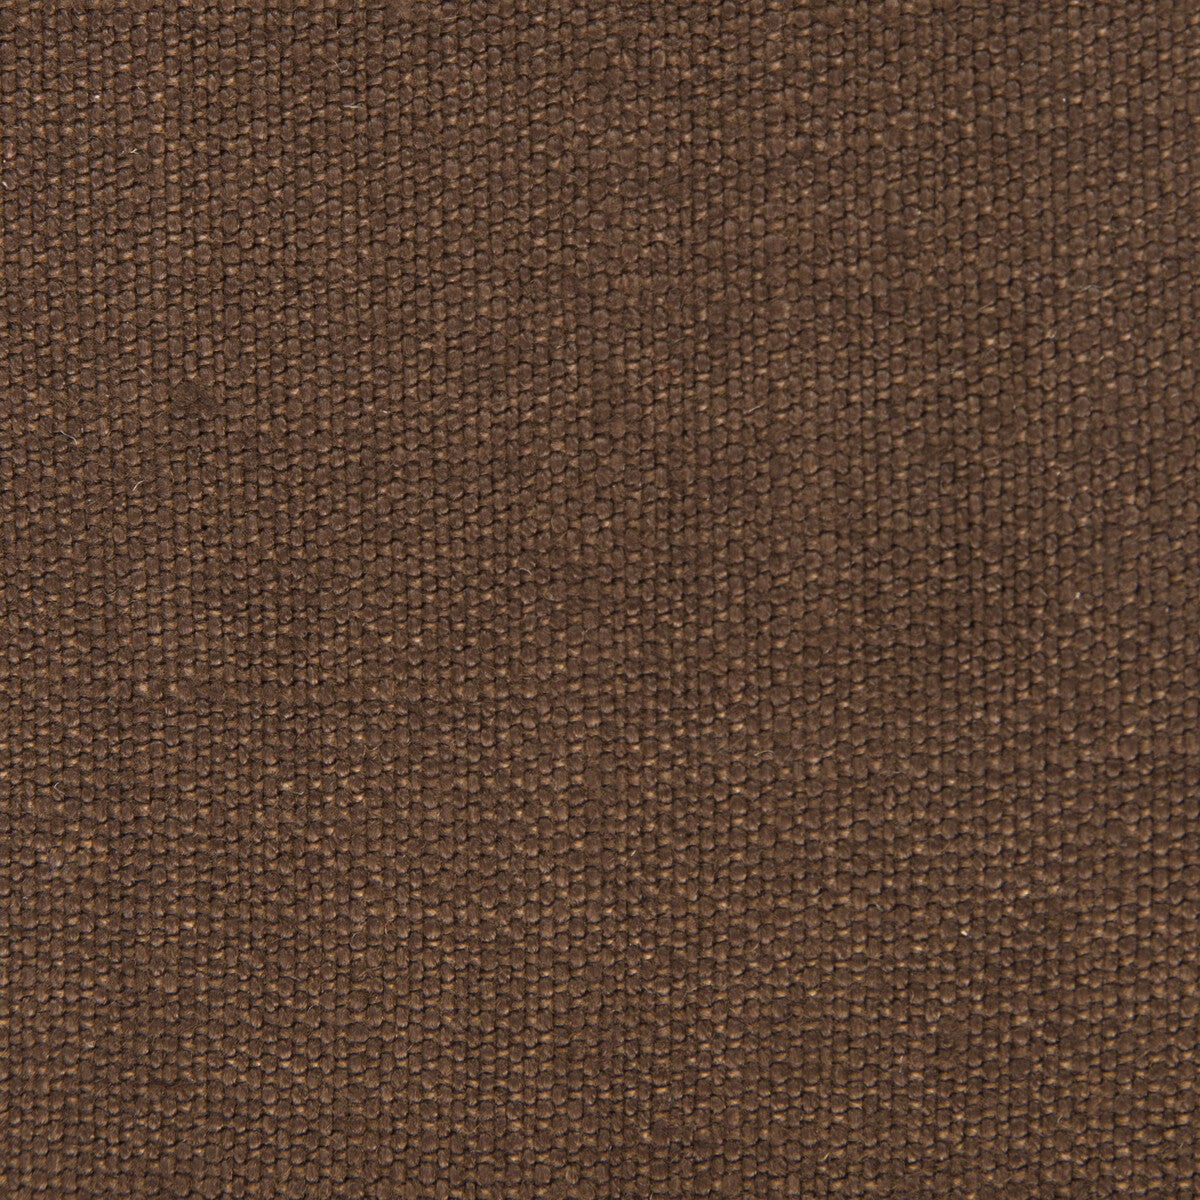 Nicaragua fabric in tabaco color - pattern GDT5239.029.0 - by Gaston y Daniela in the Basics collection